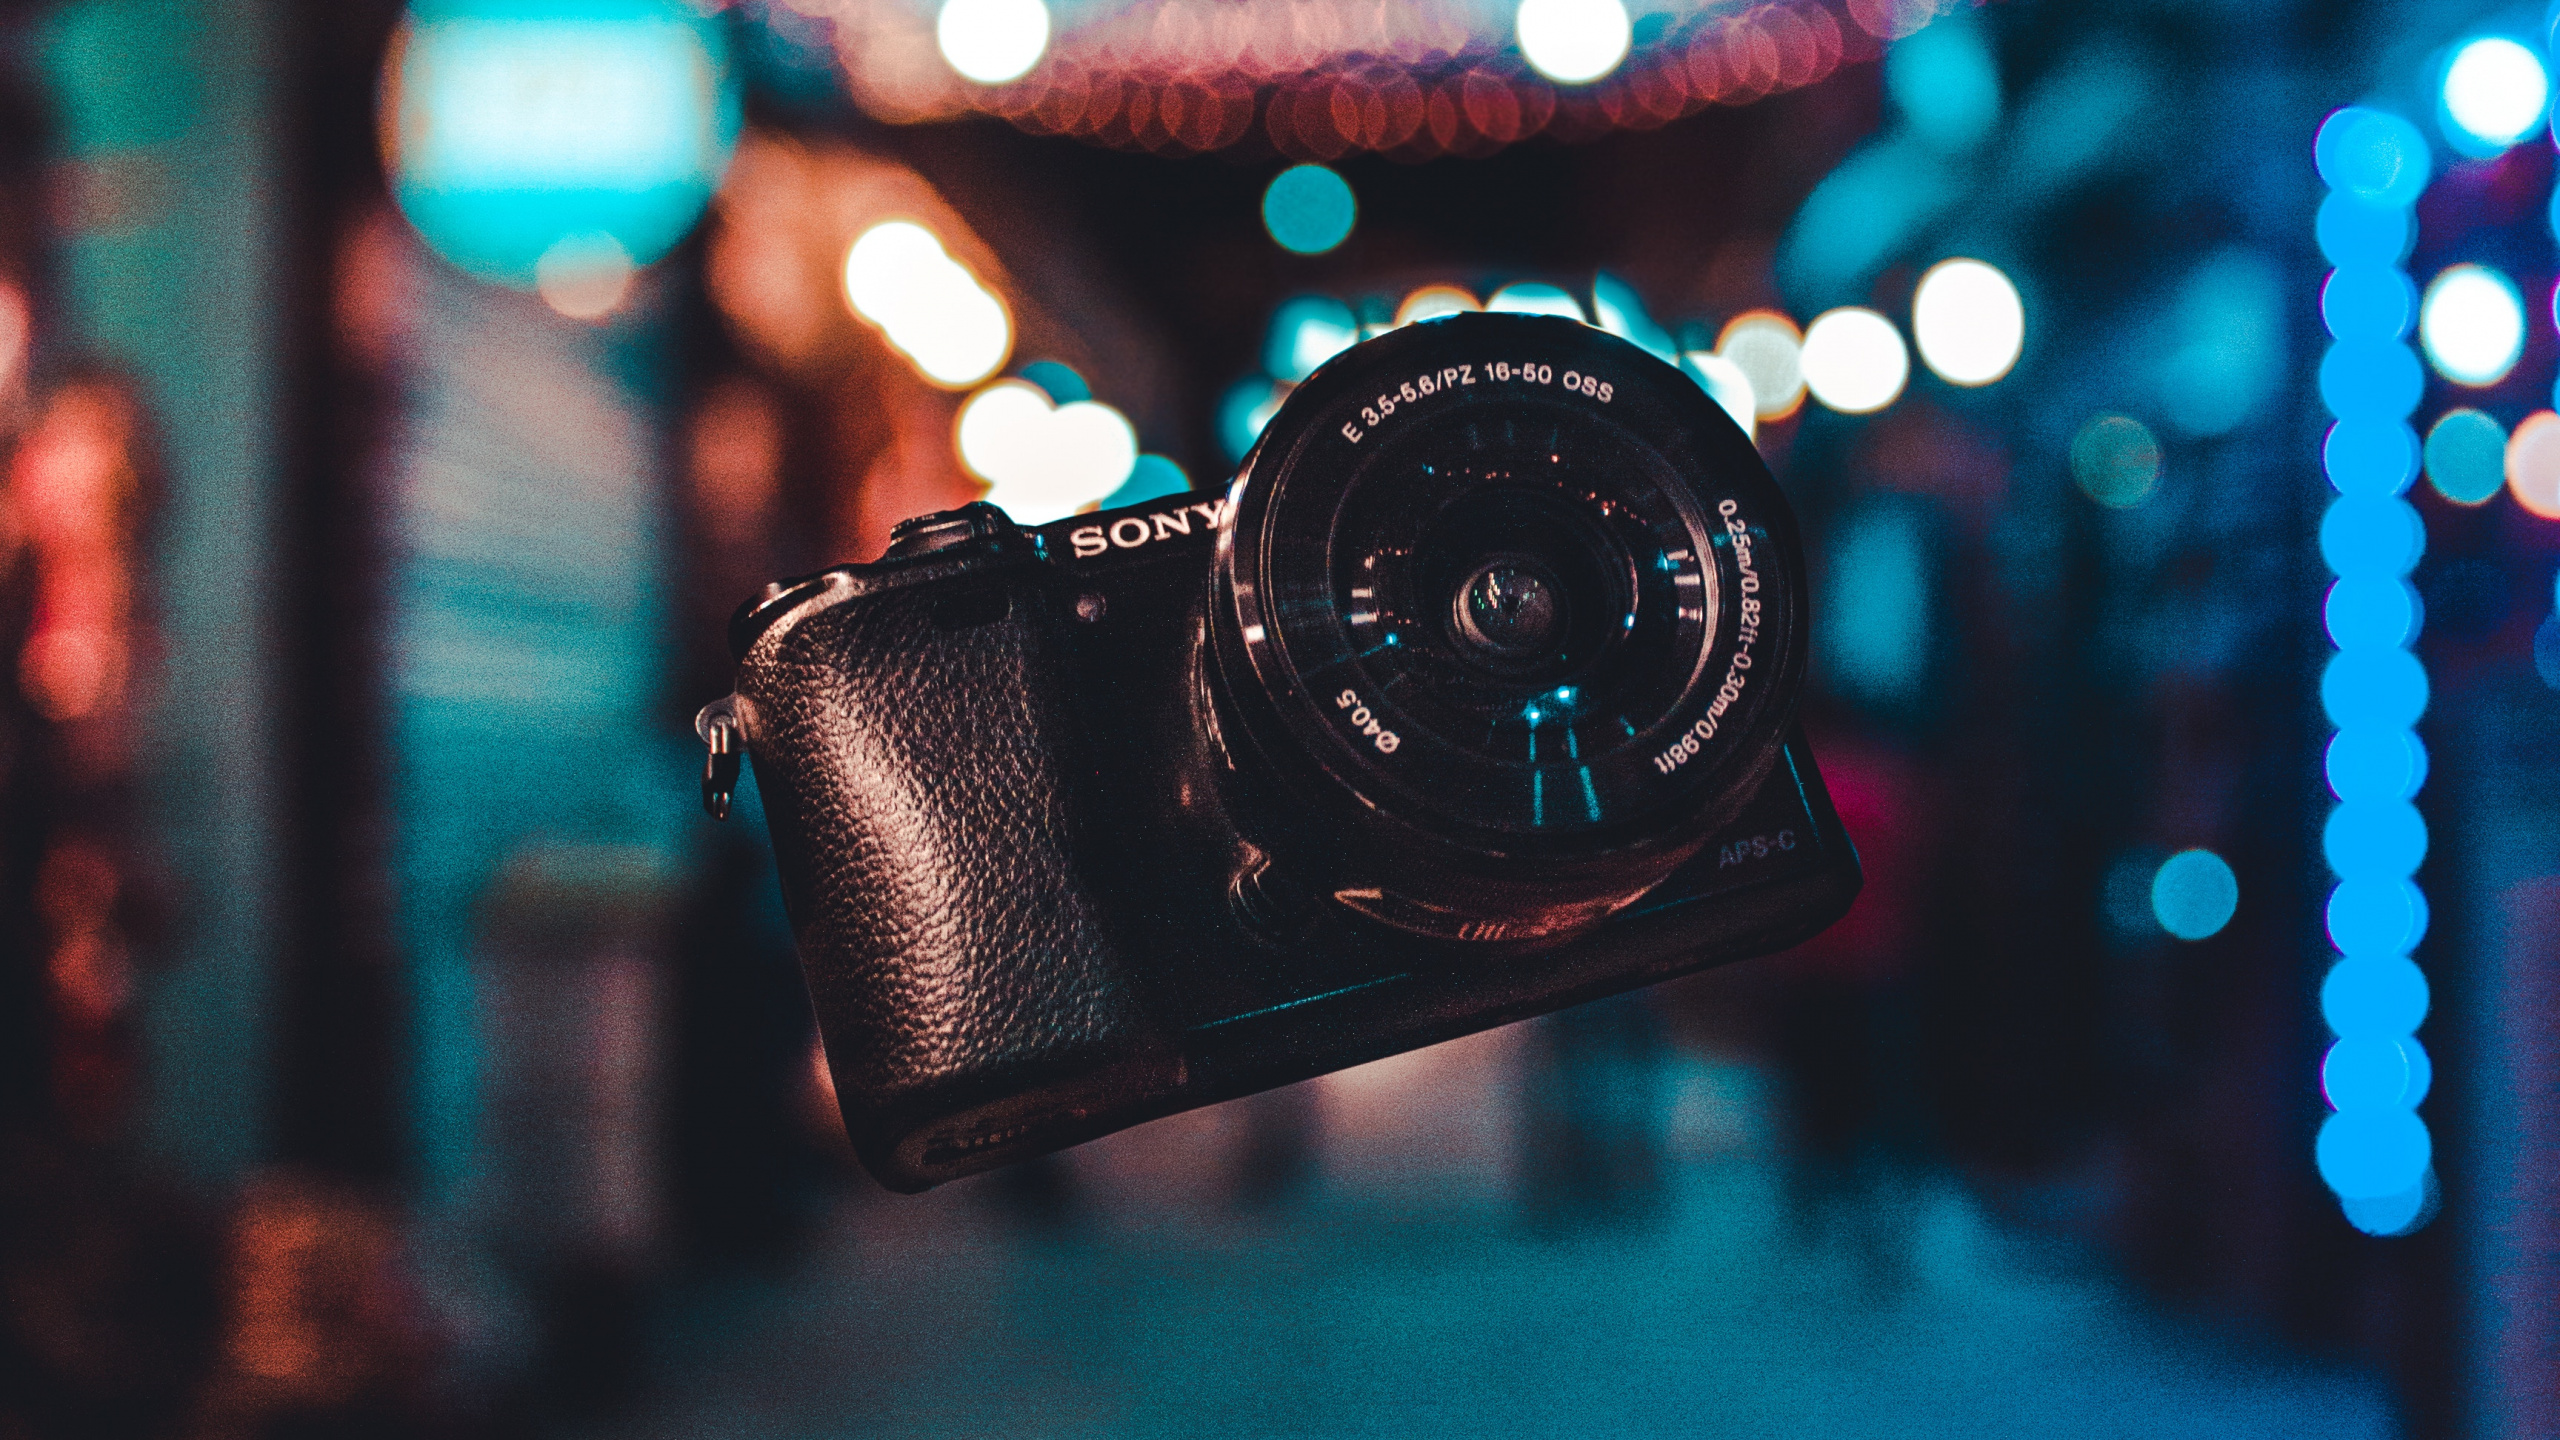 Black Dslr Camera on Blue and White String Lights. Wallpaper in 2560x1440 Resolution